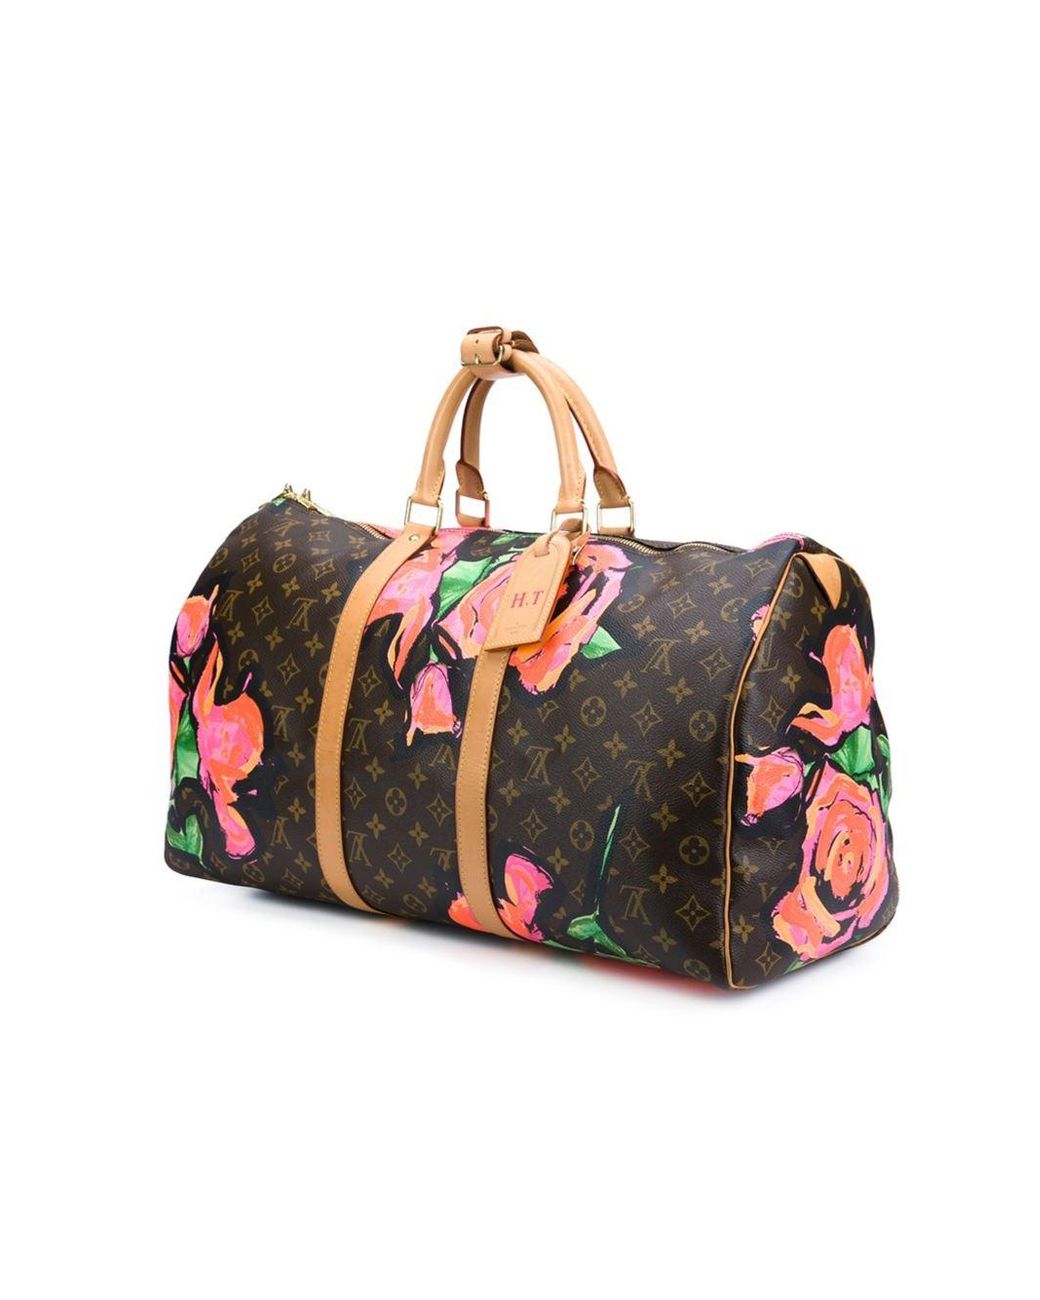 Stephen Sprouse Keepall 50 Duffle Bag (Authentic Pre-Owned) – The Lady Bag